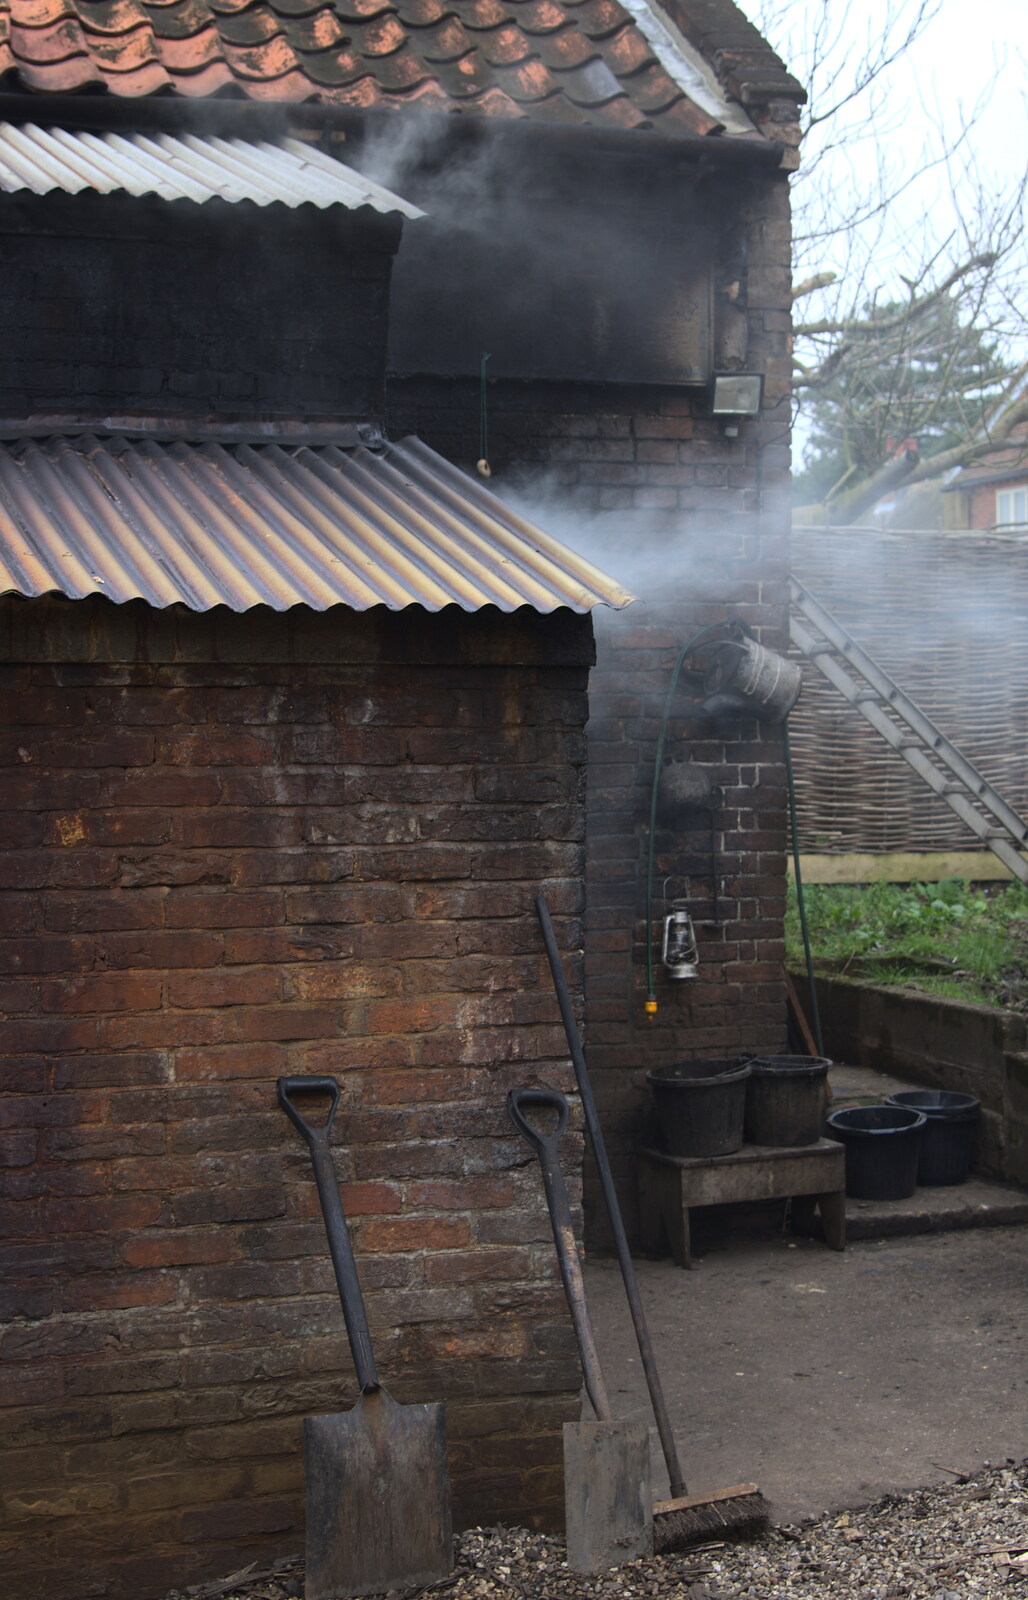 Smoke drifts out of the smokehouse from A Trip to Orford Castle, Orford, Suffolk - 2nd March 2014